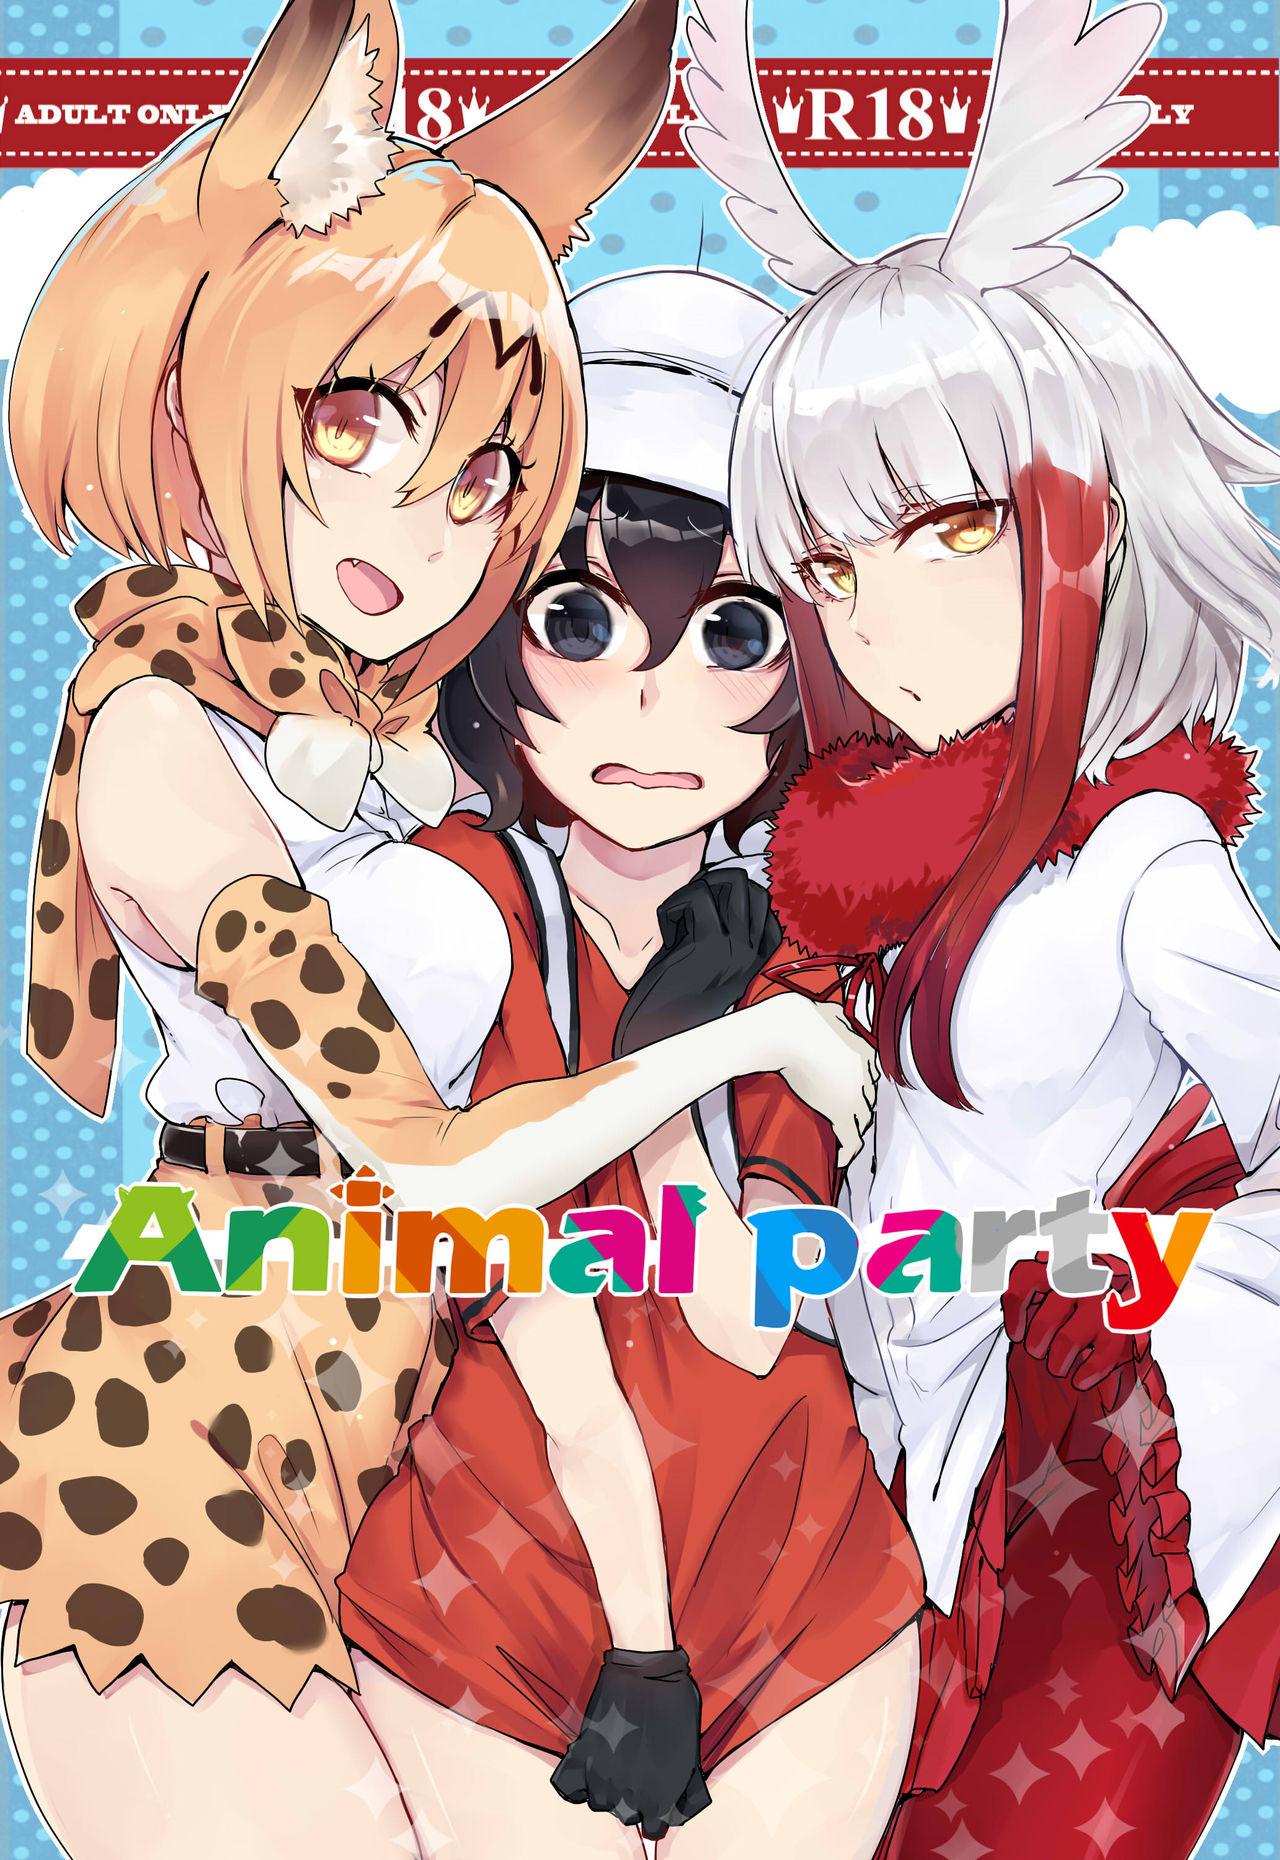 Animal party 0